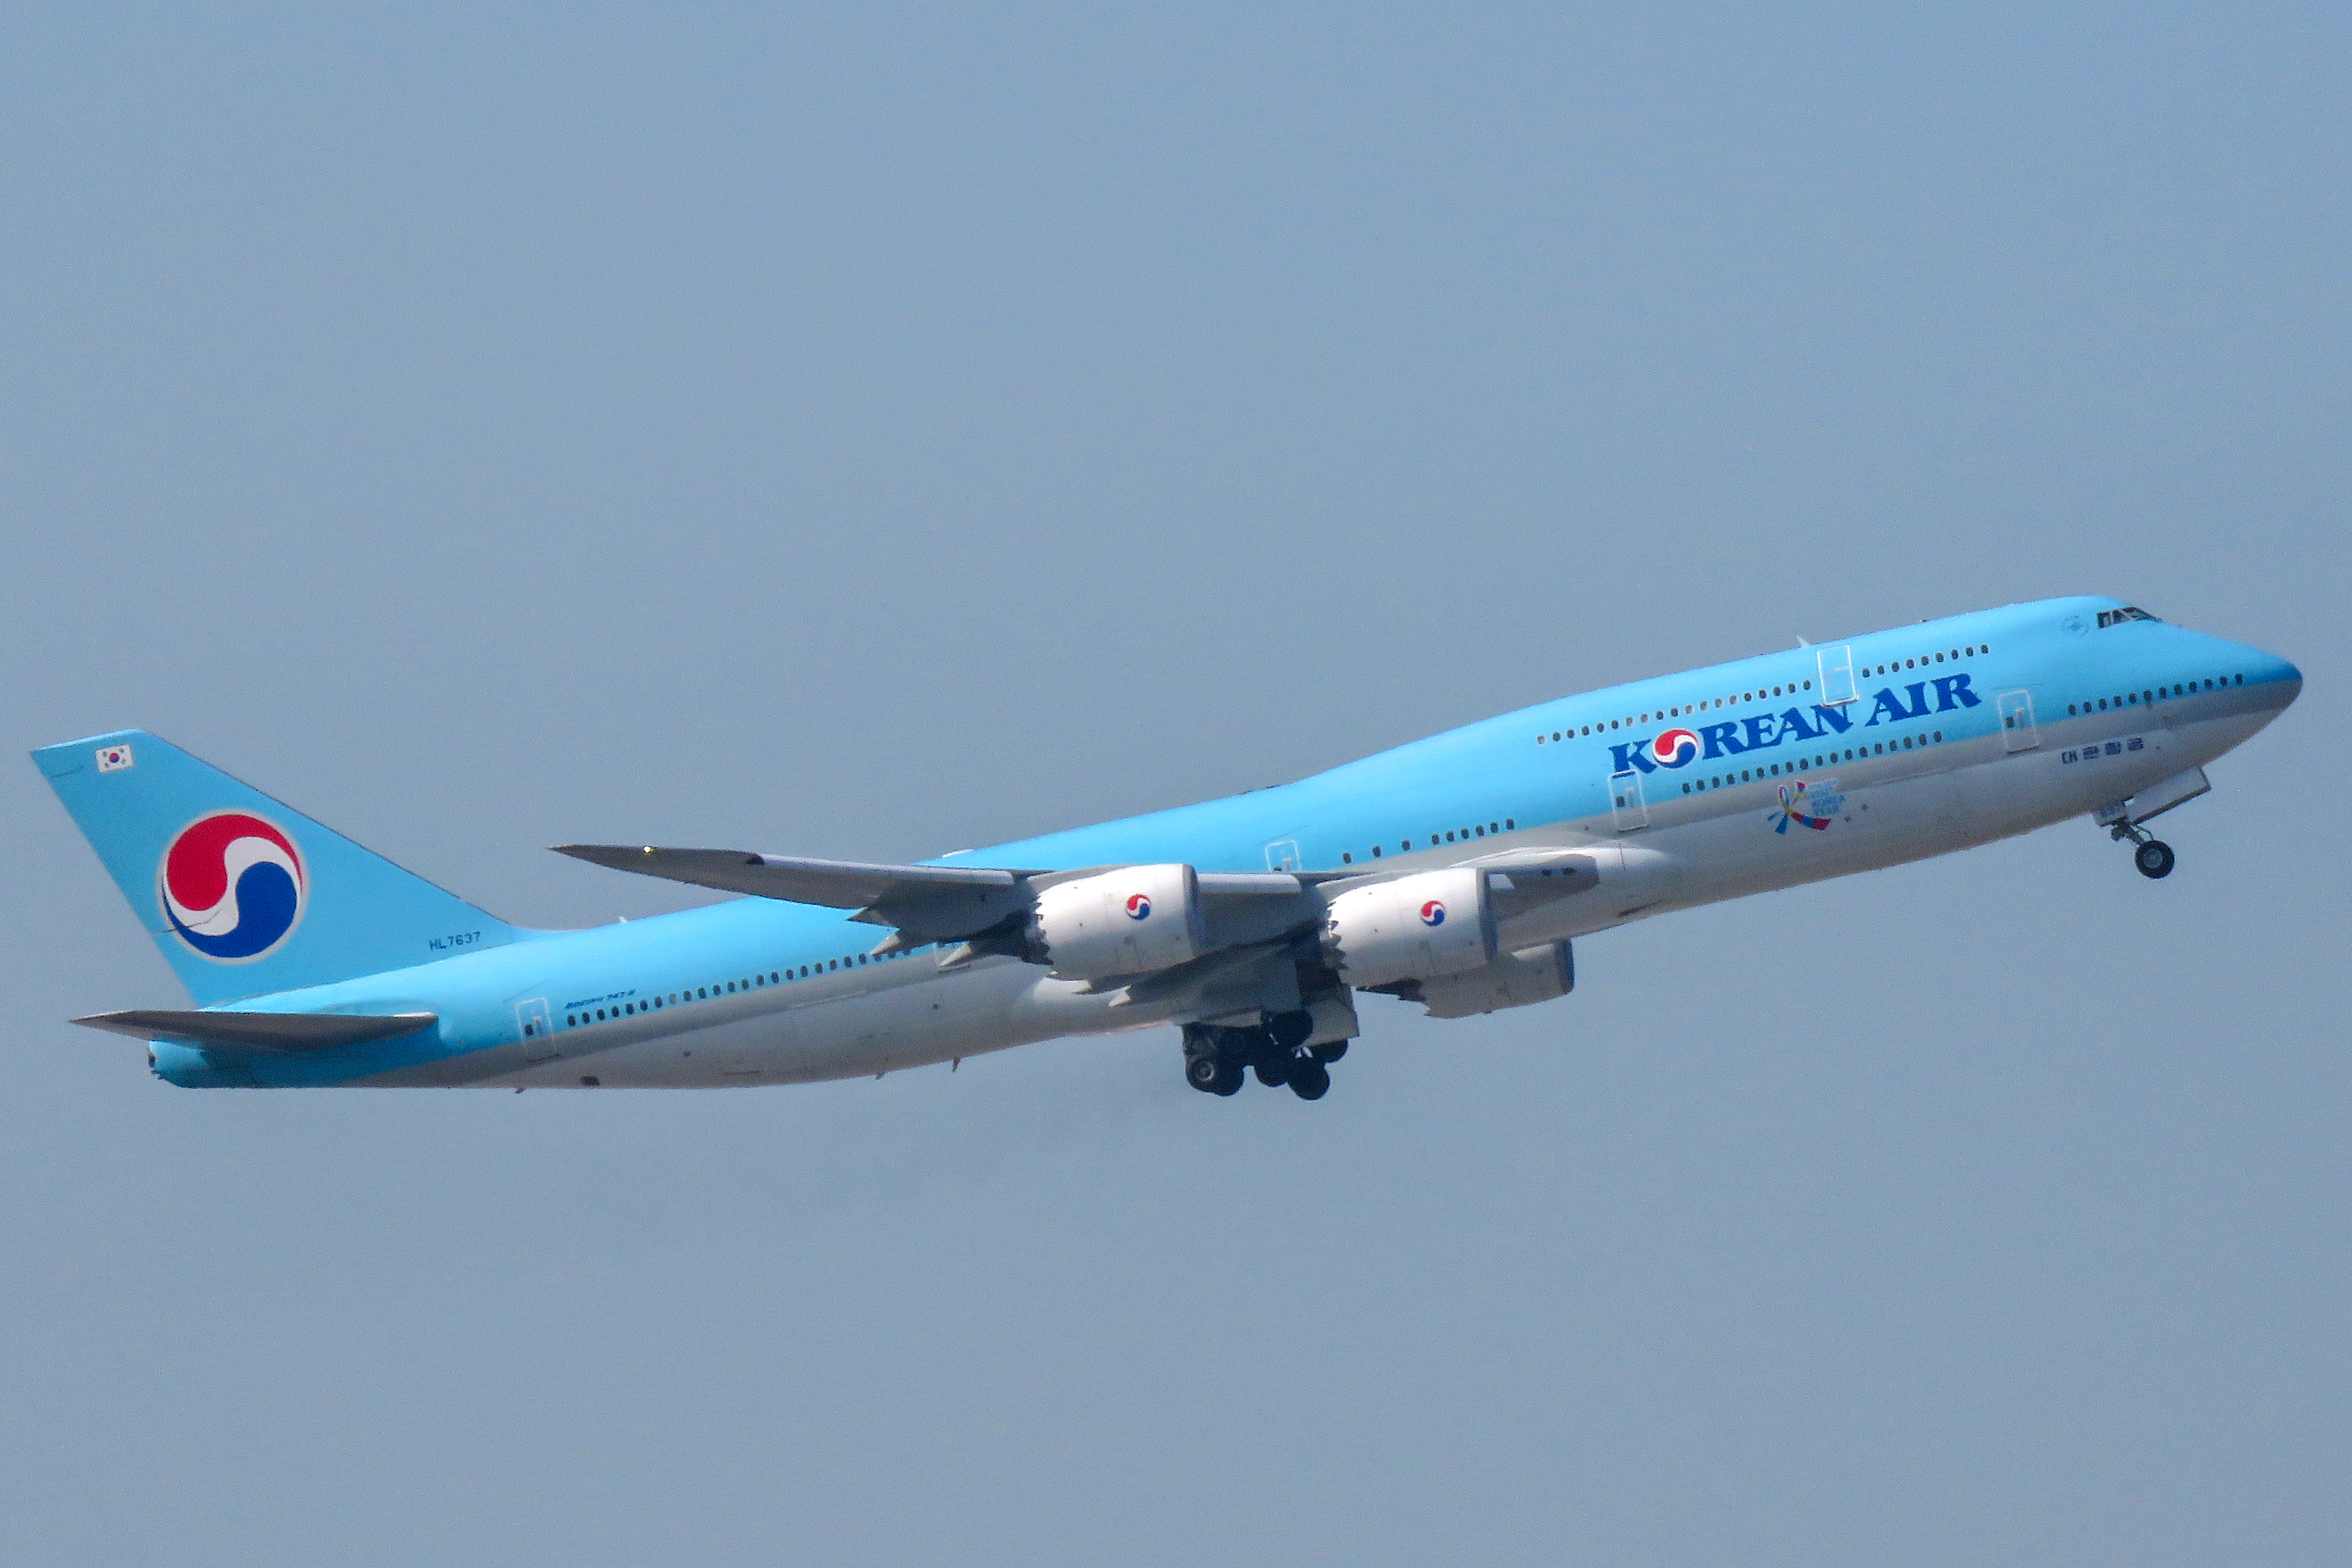 Korean Air: From Regional Carrier to Global Airline